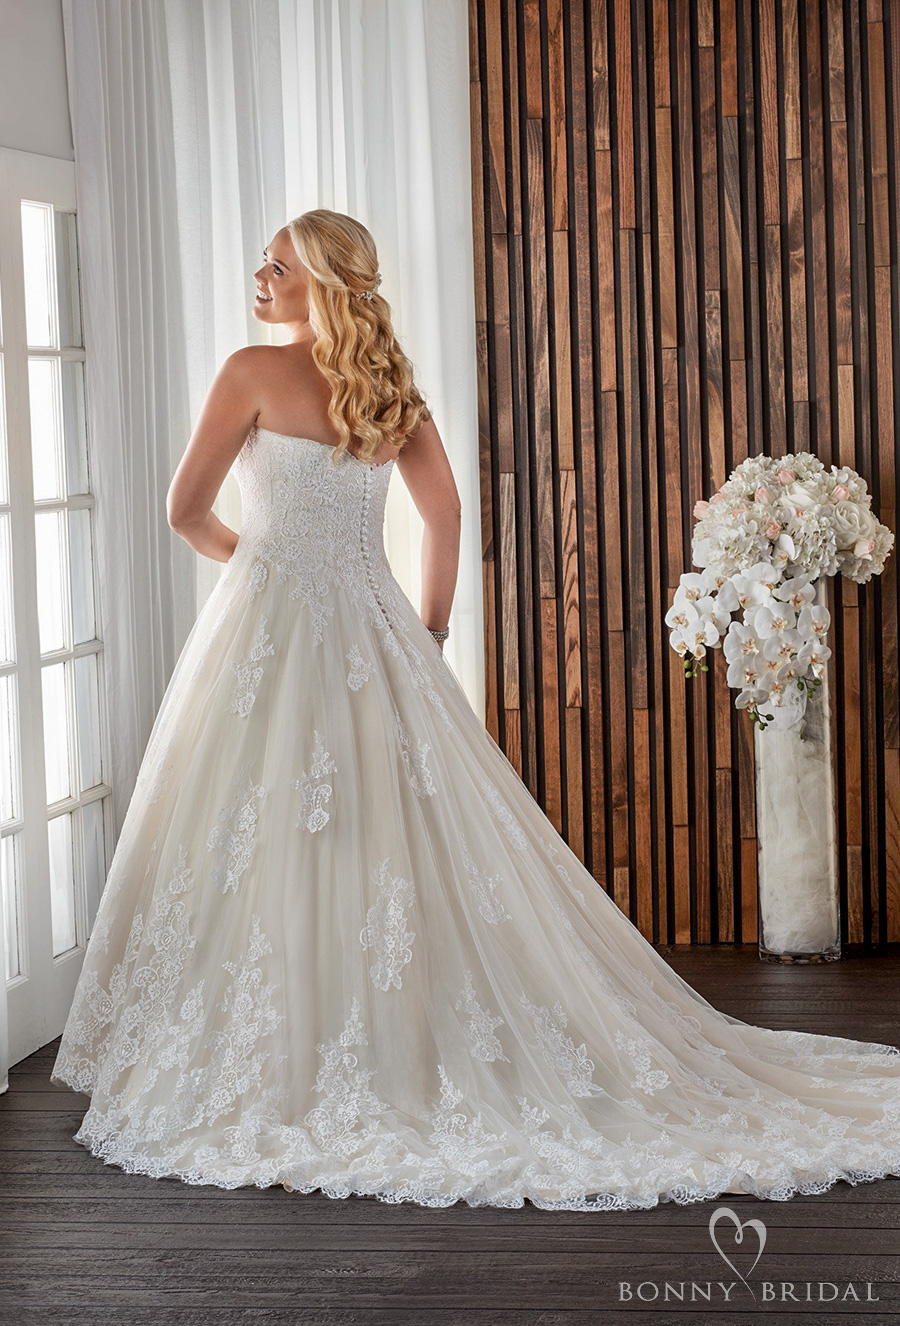 Bonny Bridal Wedding Dresses — Unforgettable Styles for Every Bride